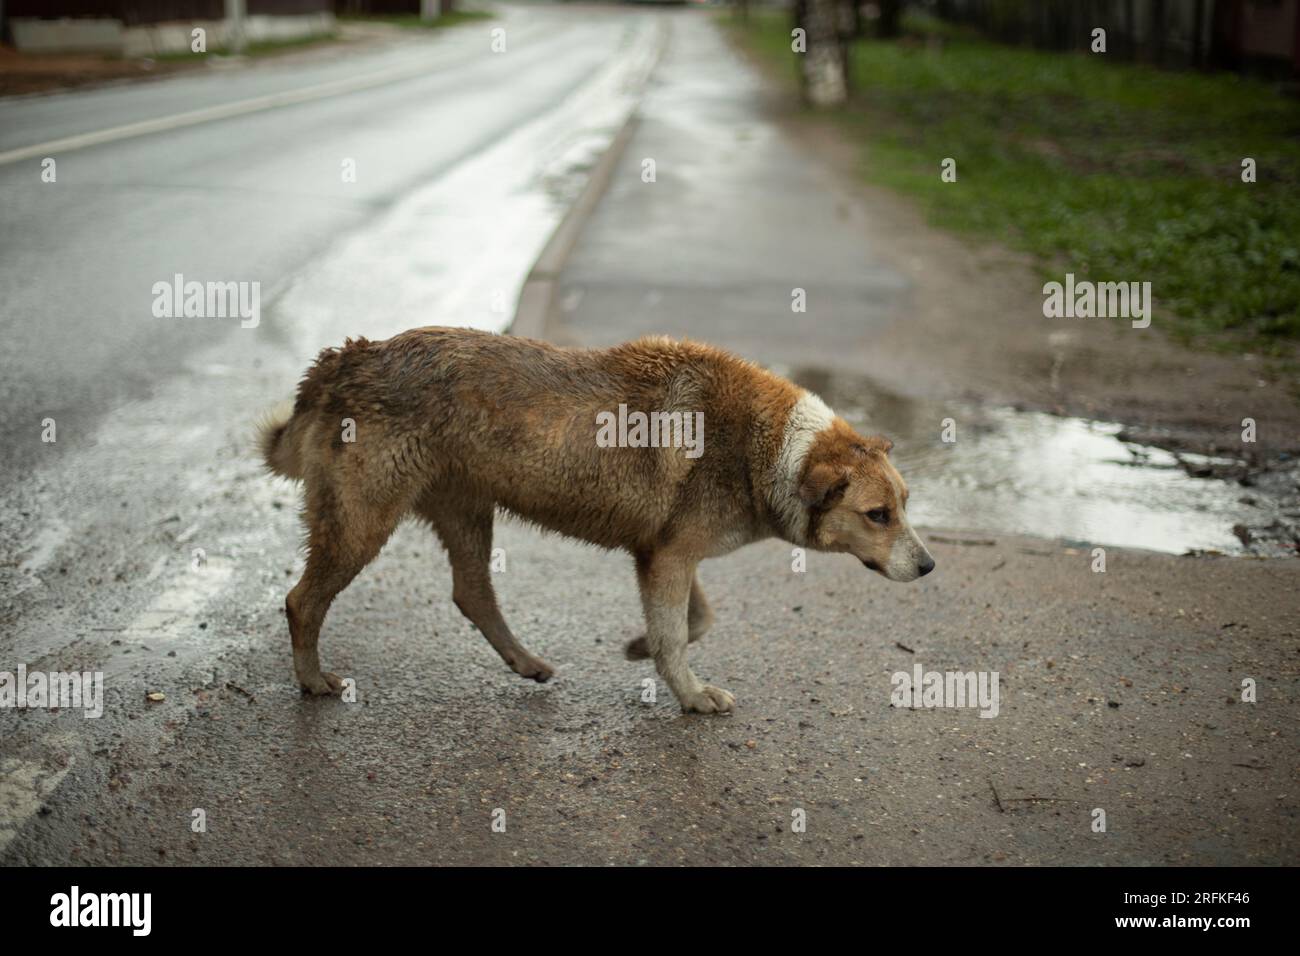 Angry dog on street. Homeless dog on road. Pet without owner. Stock Photo